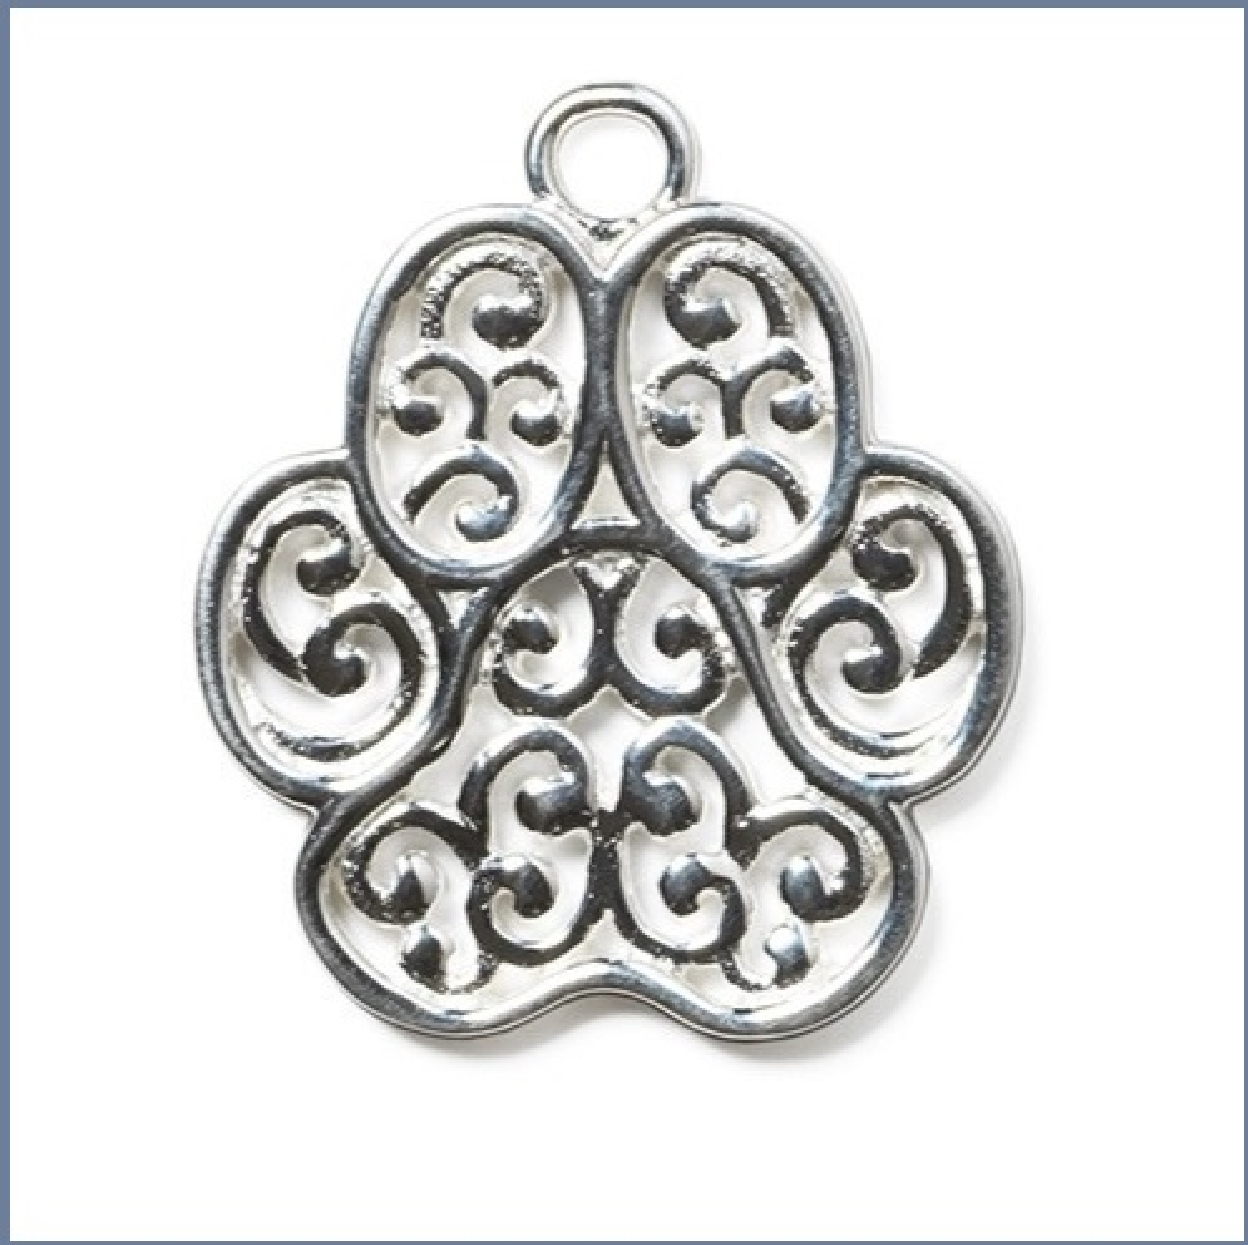 Southern Gates Small Animal Tag Paw Print Charm
Sterling Silver over Brass
CM126